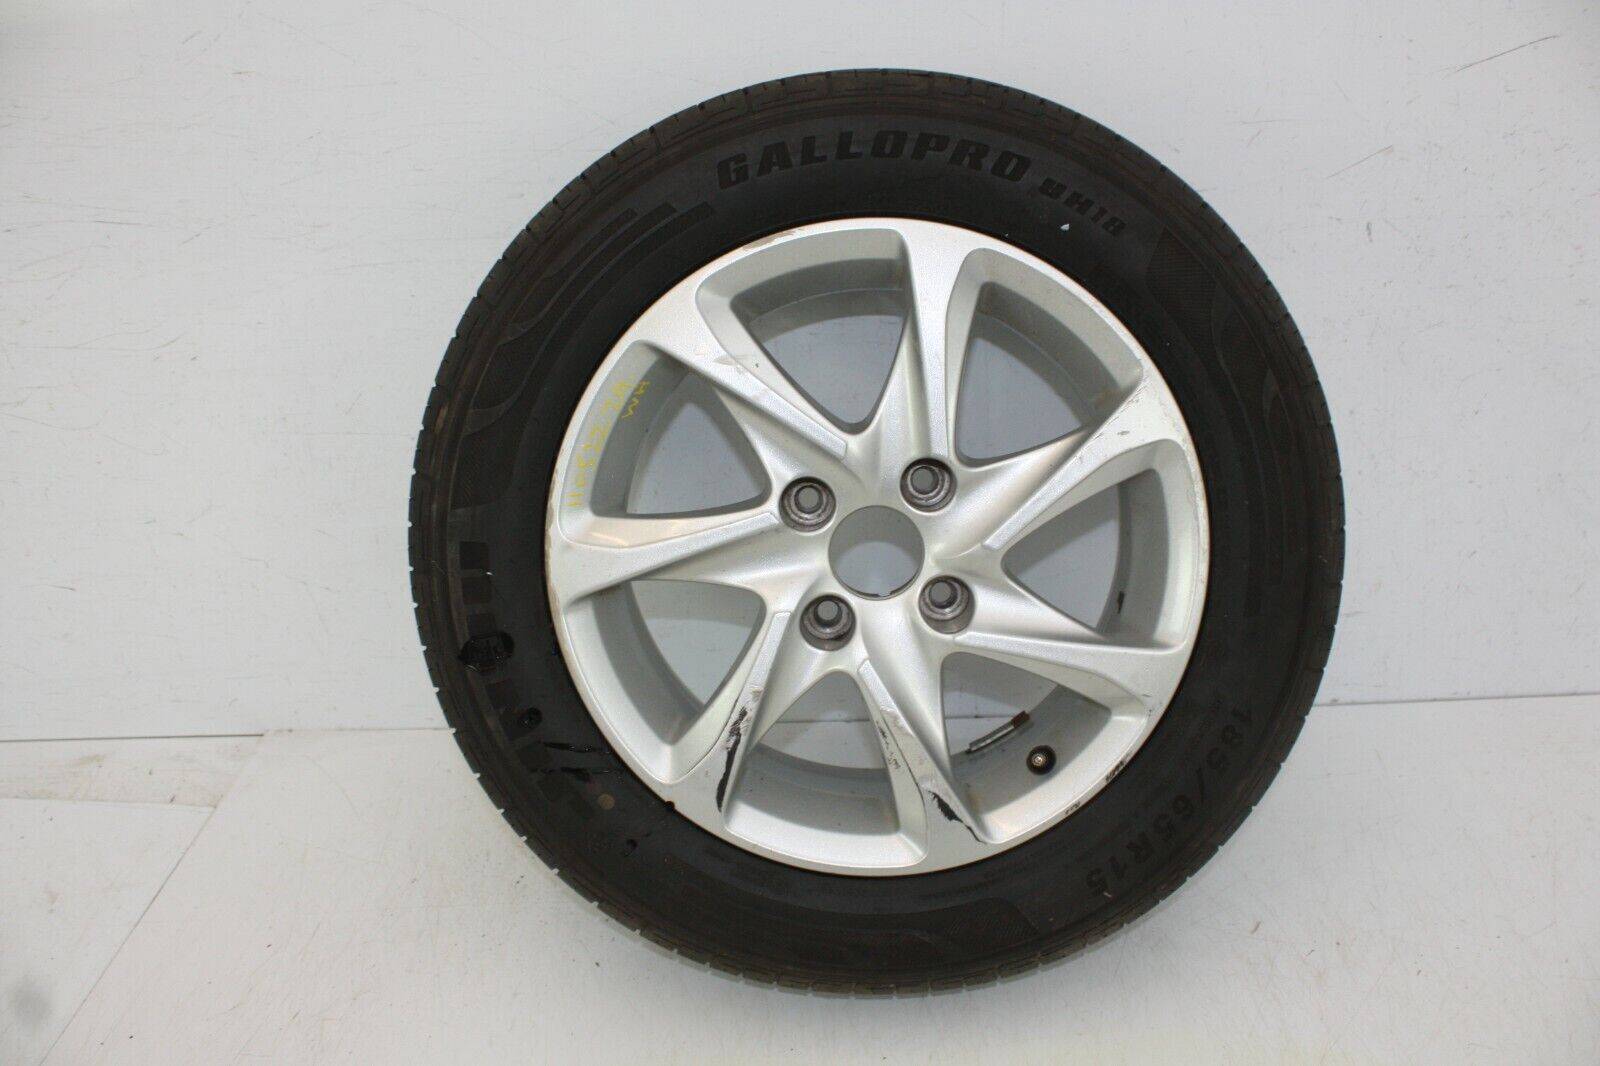 Peugeot-208-15-Inch-Alloy-Wheel-with-Tyre-9673773577-Genuine-175458680937